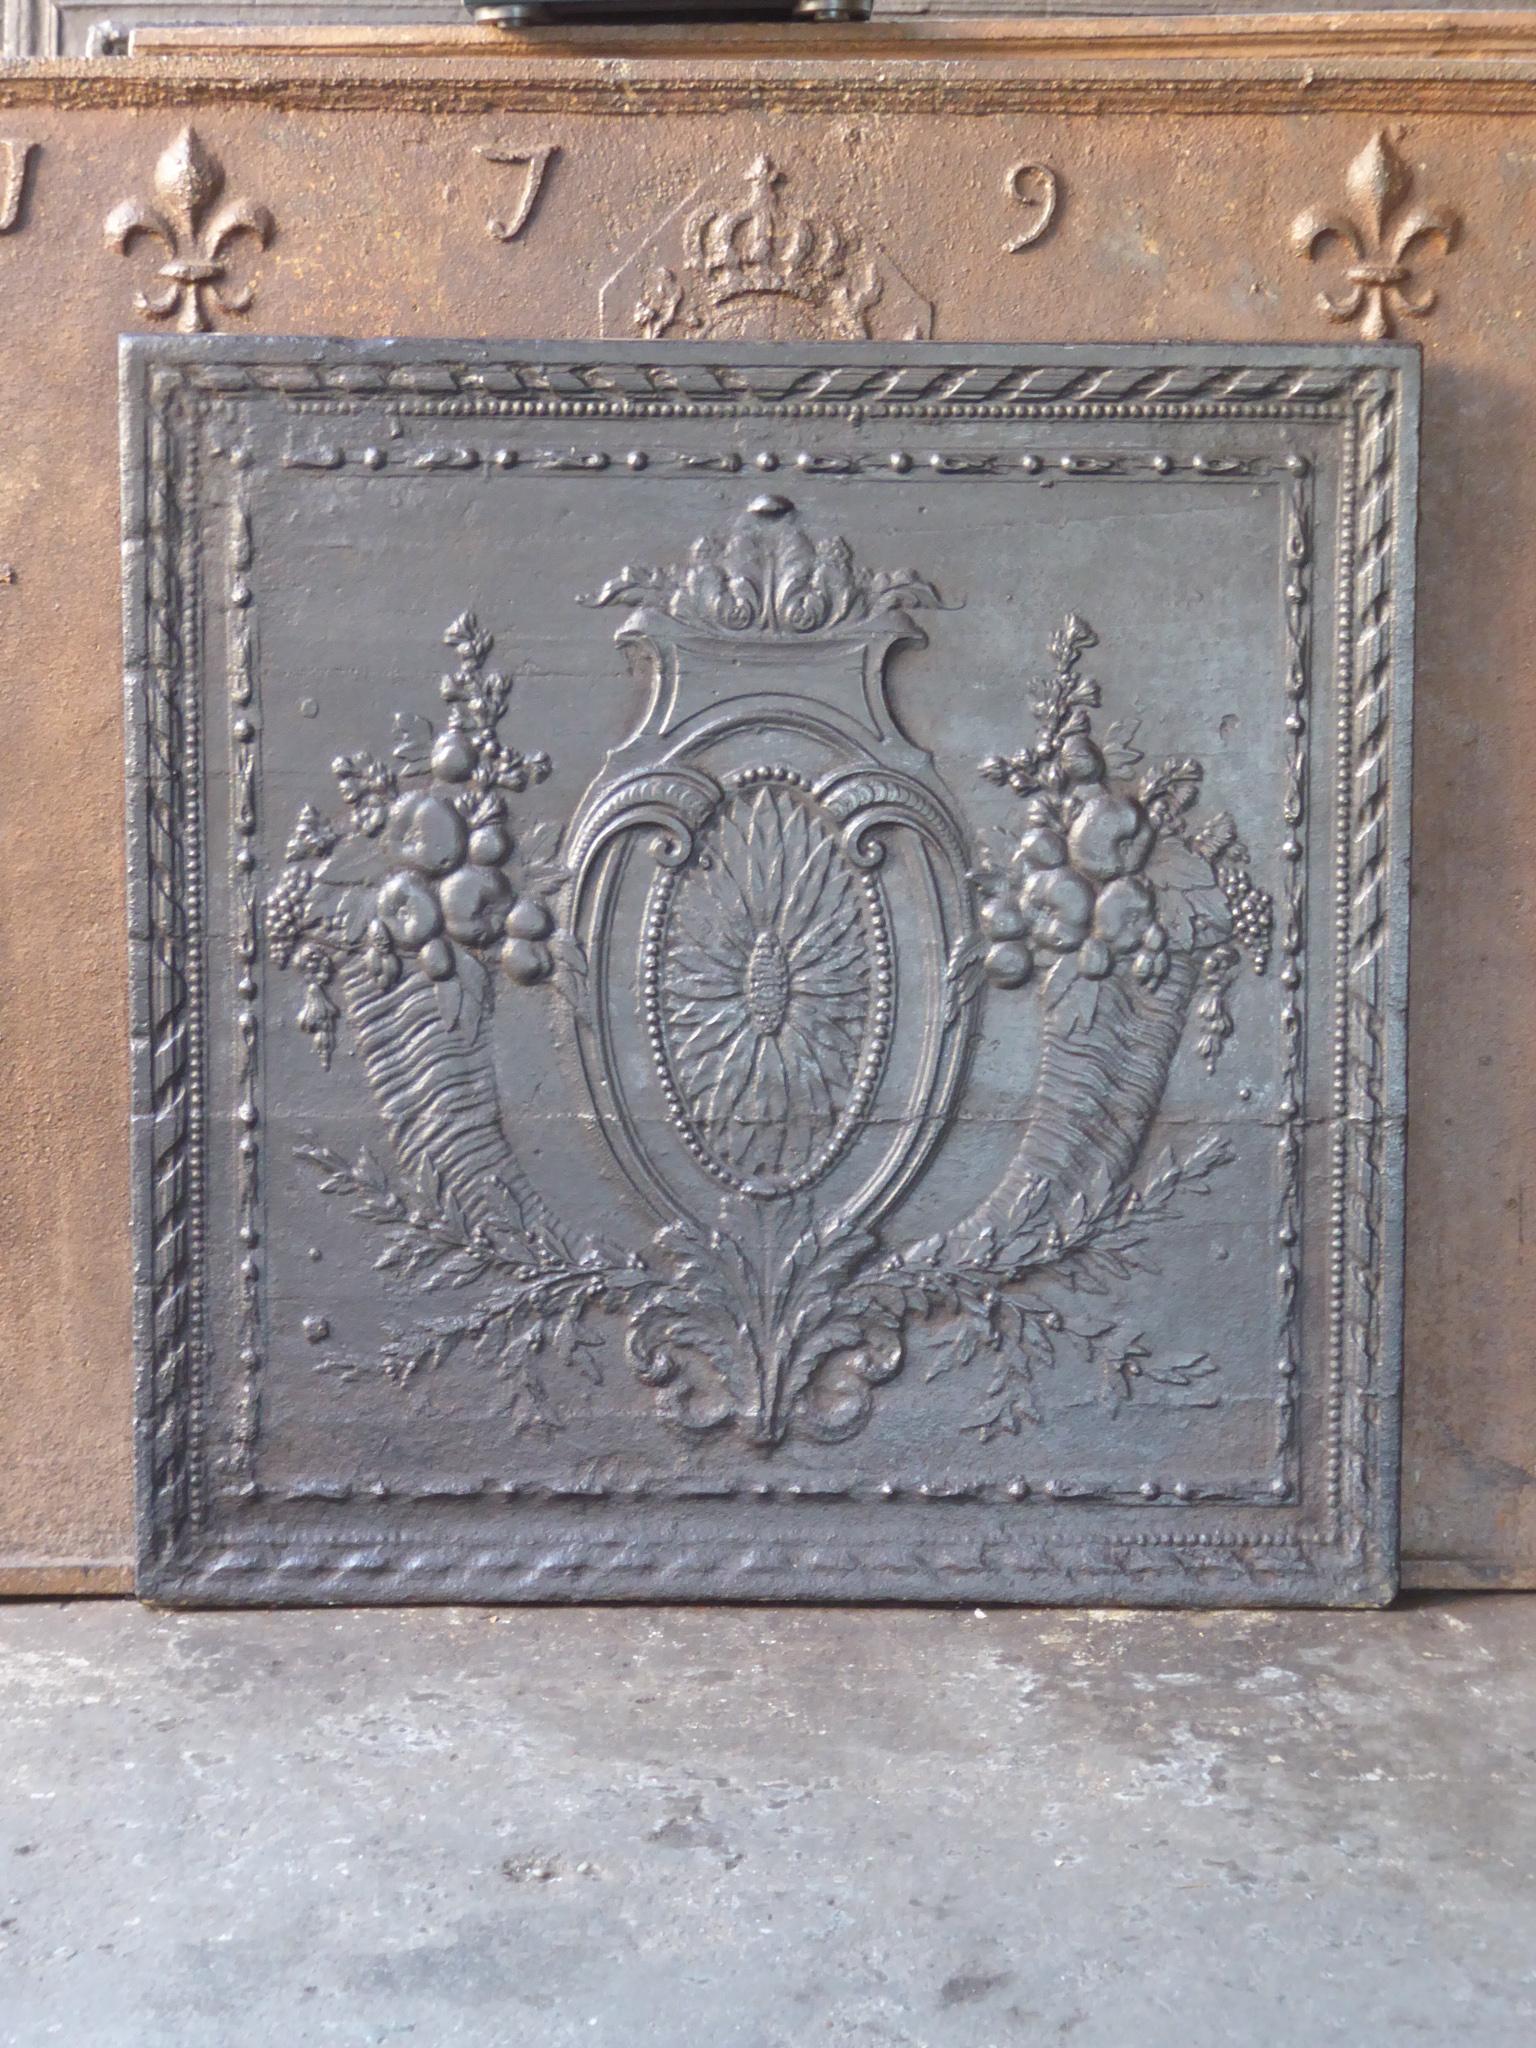 18th Century French Louis XV period 'Fruits of the Summer' fireplace fireback. With two horns of plenty, a sunflower and other greenery.

The fireback is made of cast iron and has a black / pewter patina. The condition is good, no cracks. The